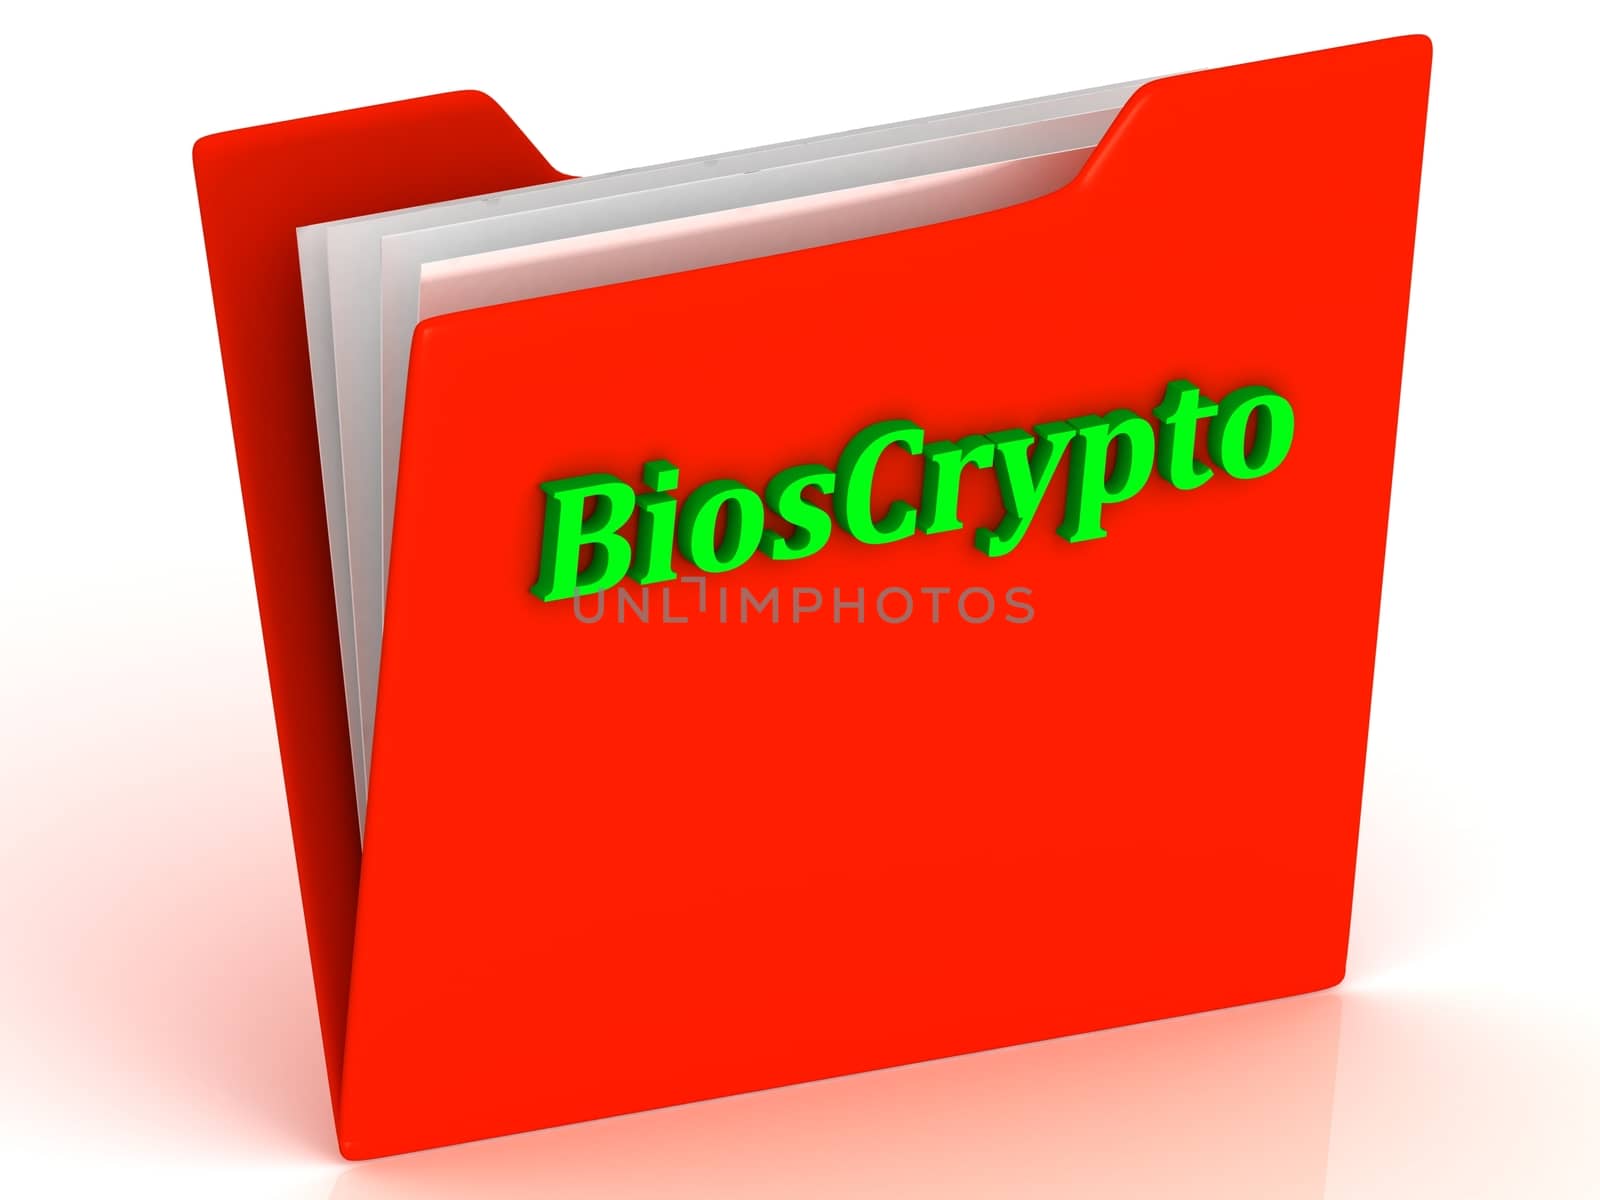 BiosCrypto- bright green letters on a gold folder on a white background